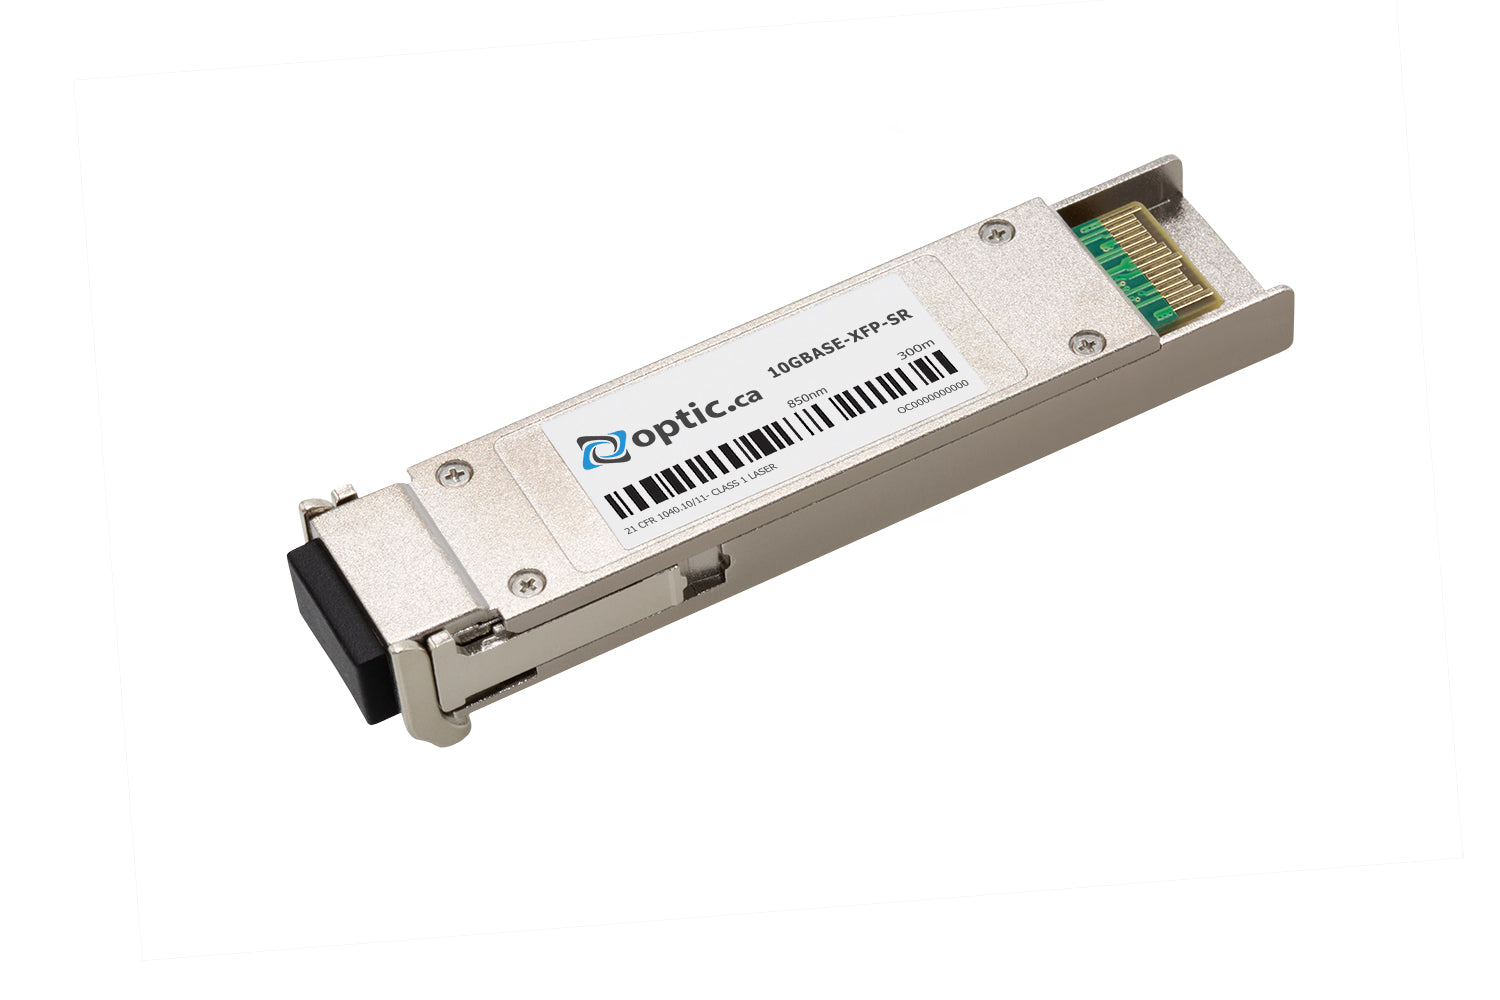 OPTIC.CA - 10GBASE-SR XFP - 10121-OC - EXTREME NETWORKS COMPATIBLE